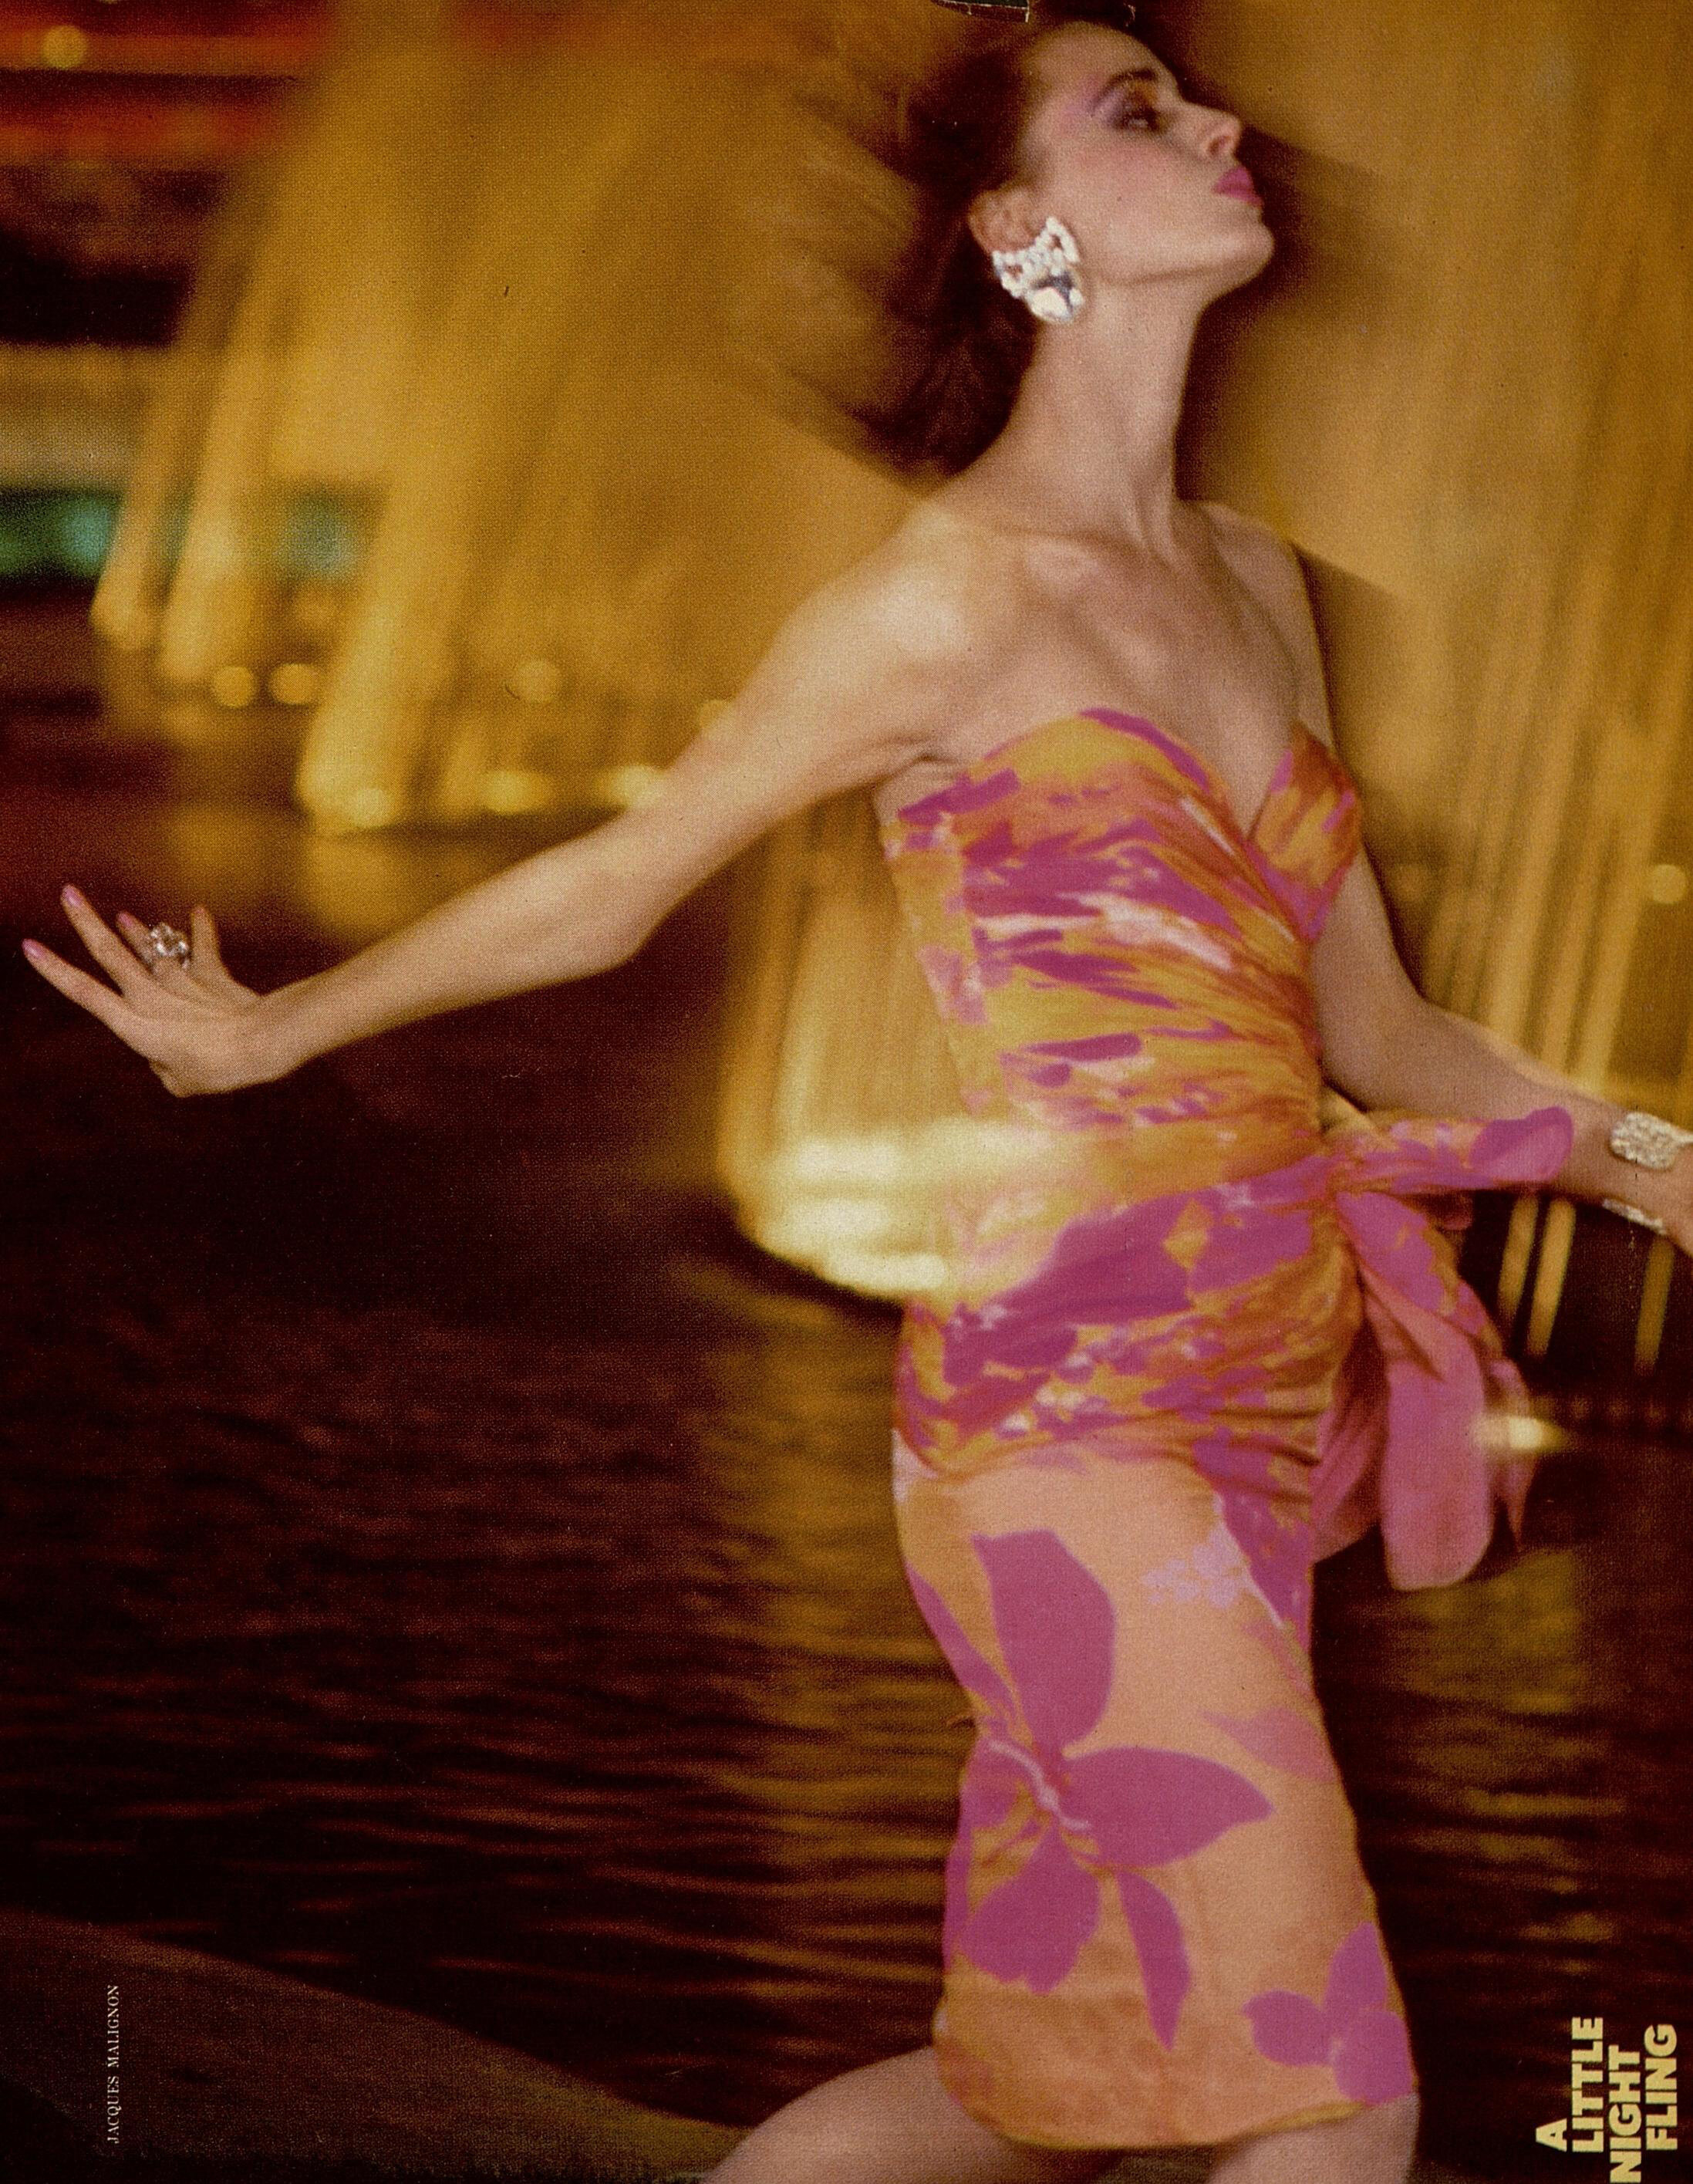 Ruched, brightly colored chiffon shot by Jacques Malignon for Harper's Bazaar, March 1985.